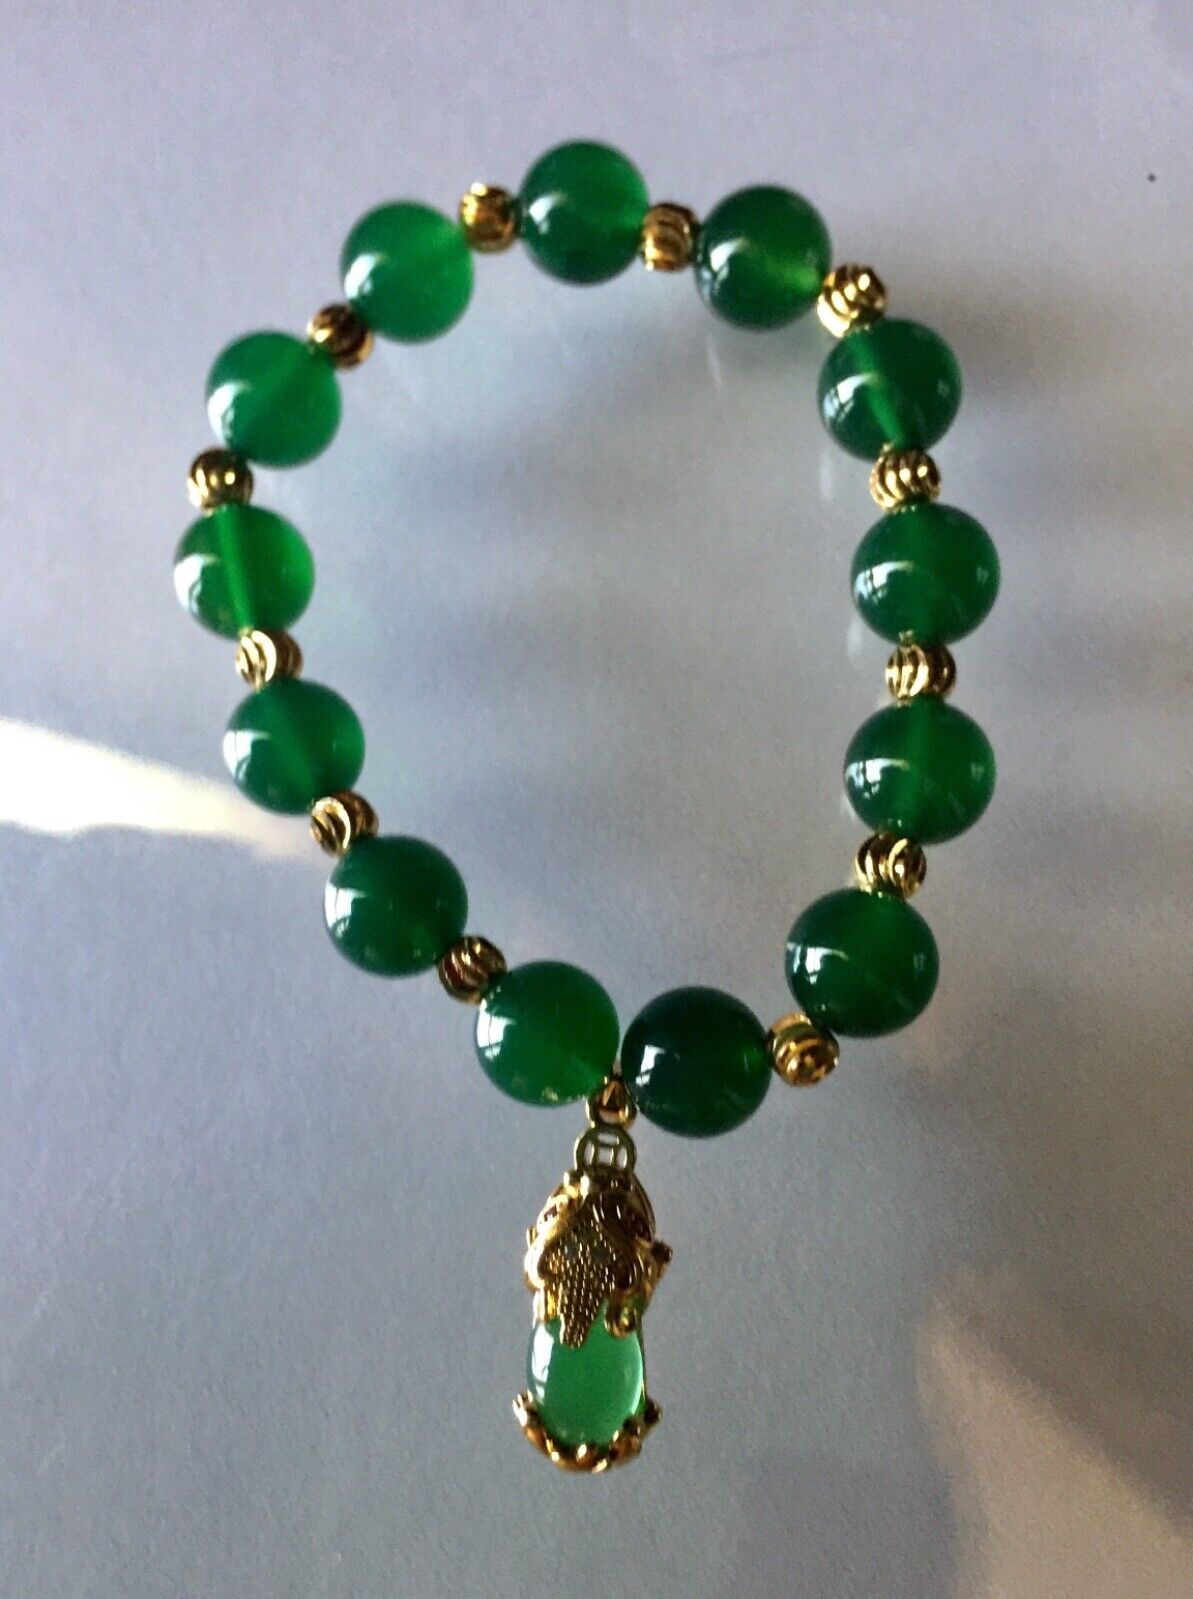 Vintage Stunning Chinese Natural Green Chalcedony Beads Bracelet   Beads Size 玉髓